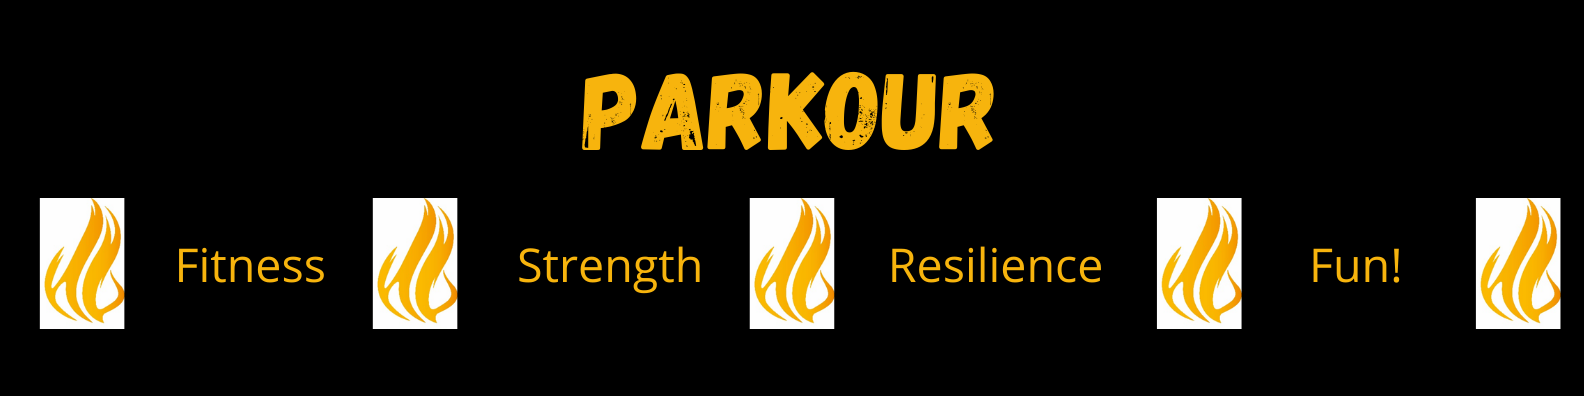 Parkour Graphic - Fitness Strength Resilience Fun! 